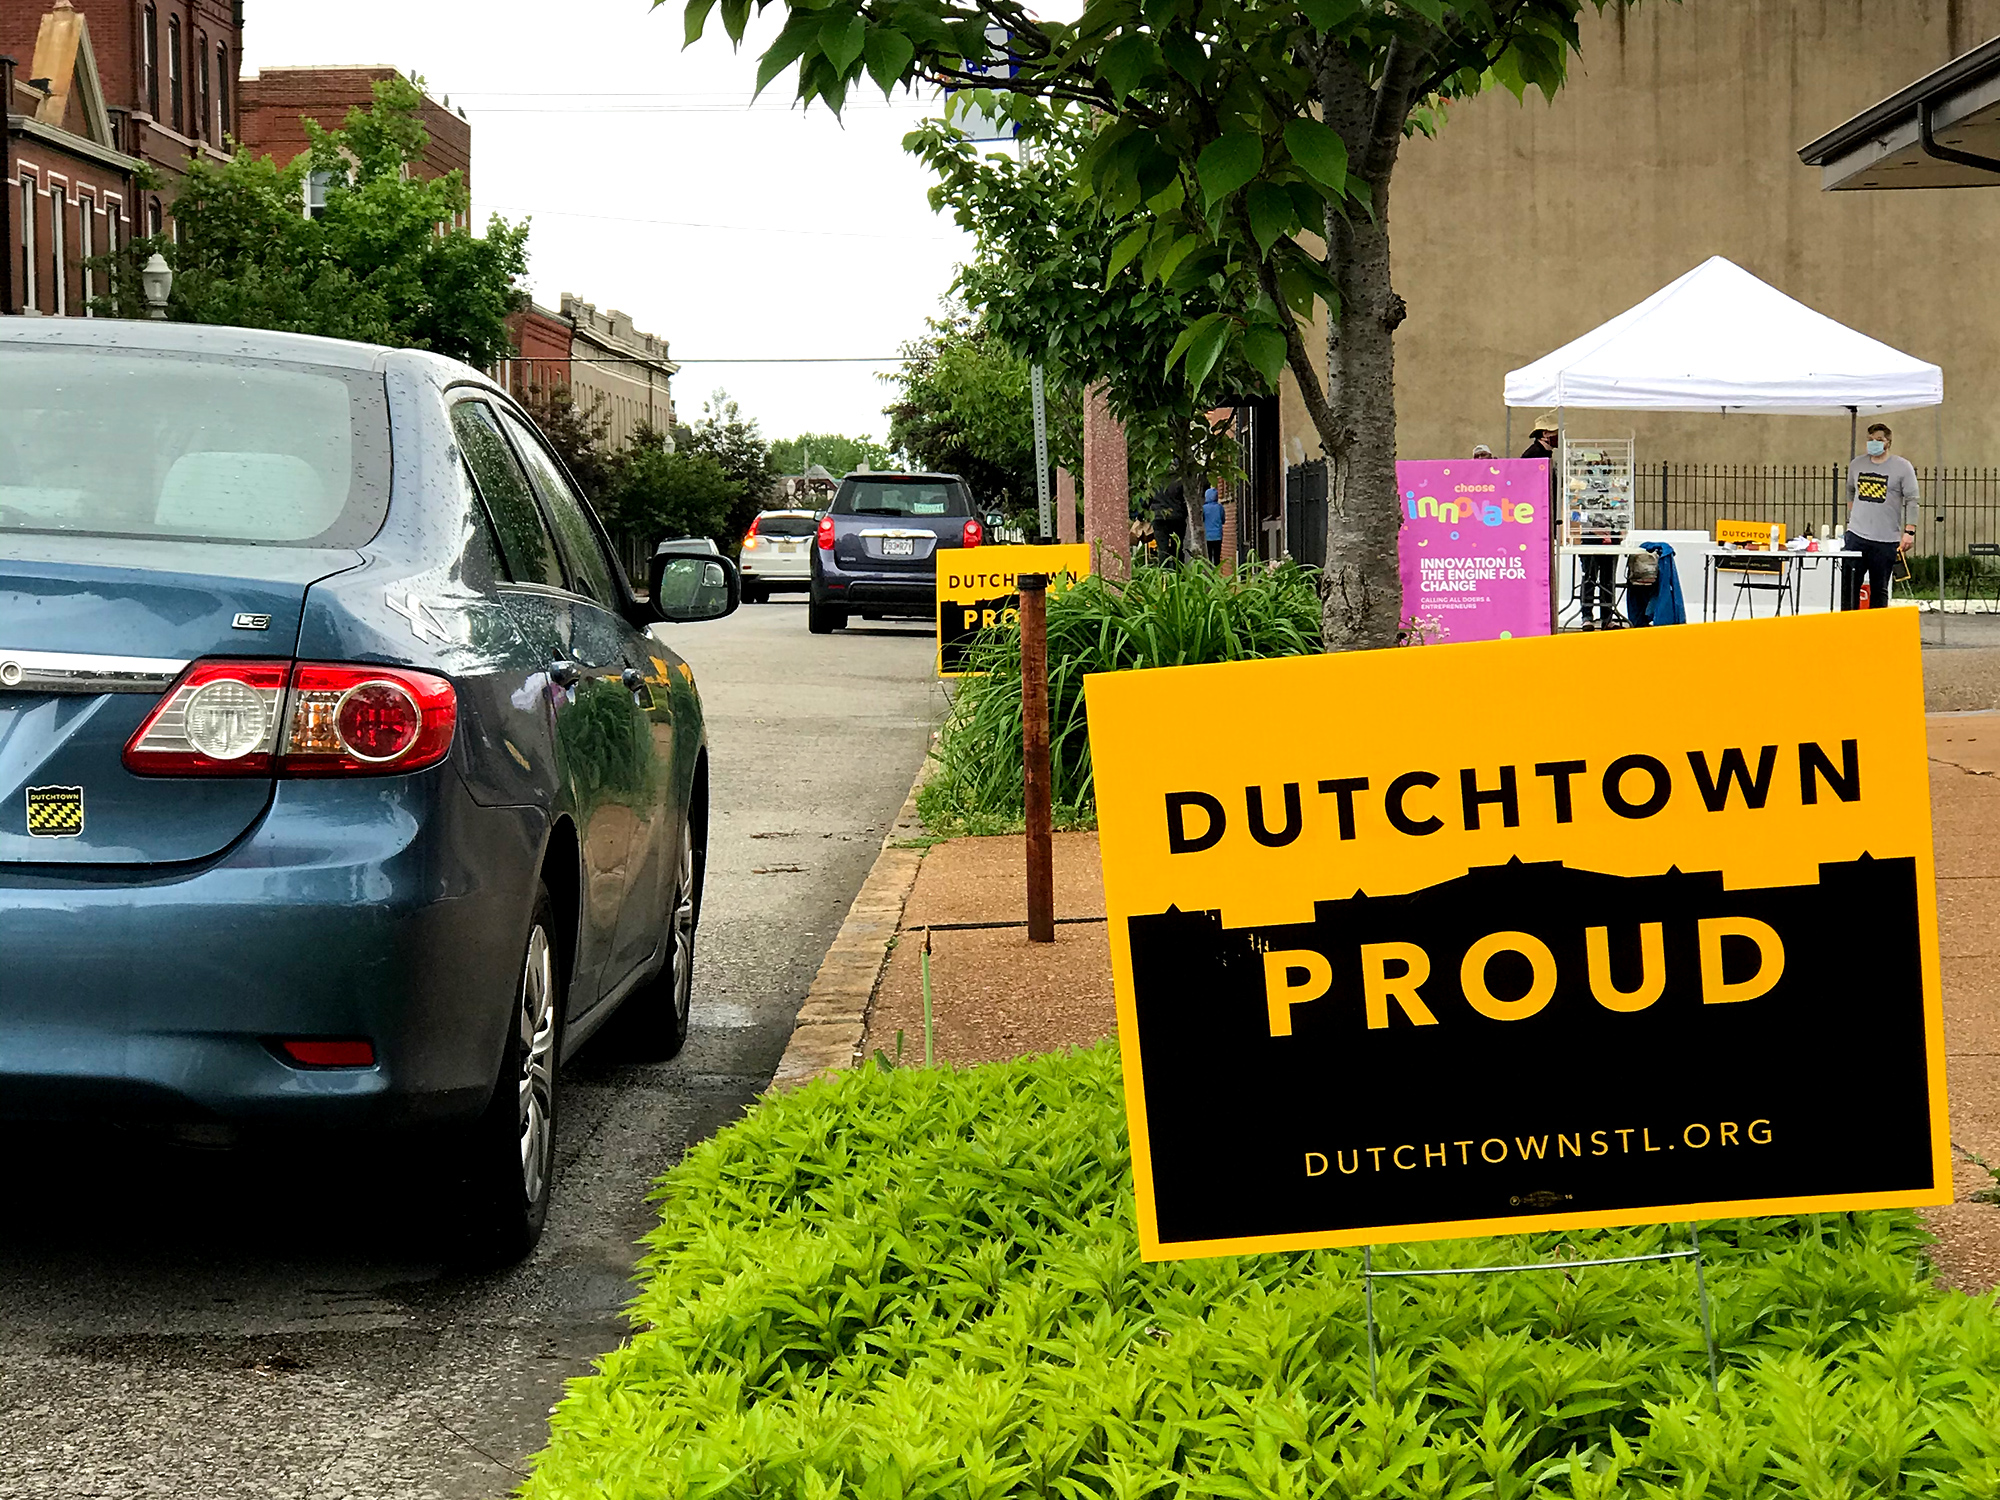 Dutchtown Proud signs in front of the Neighborhood Innovation Center in Downtown Dutchtown.